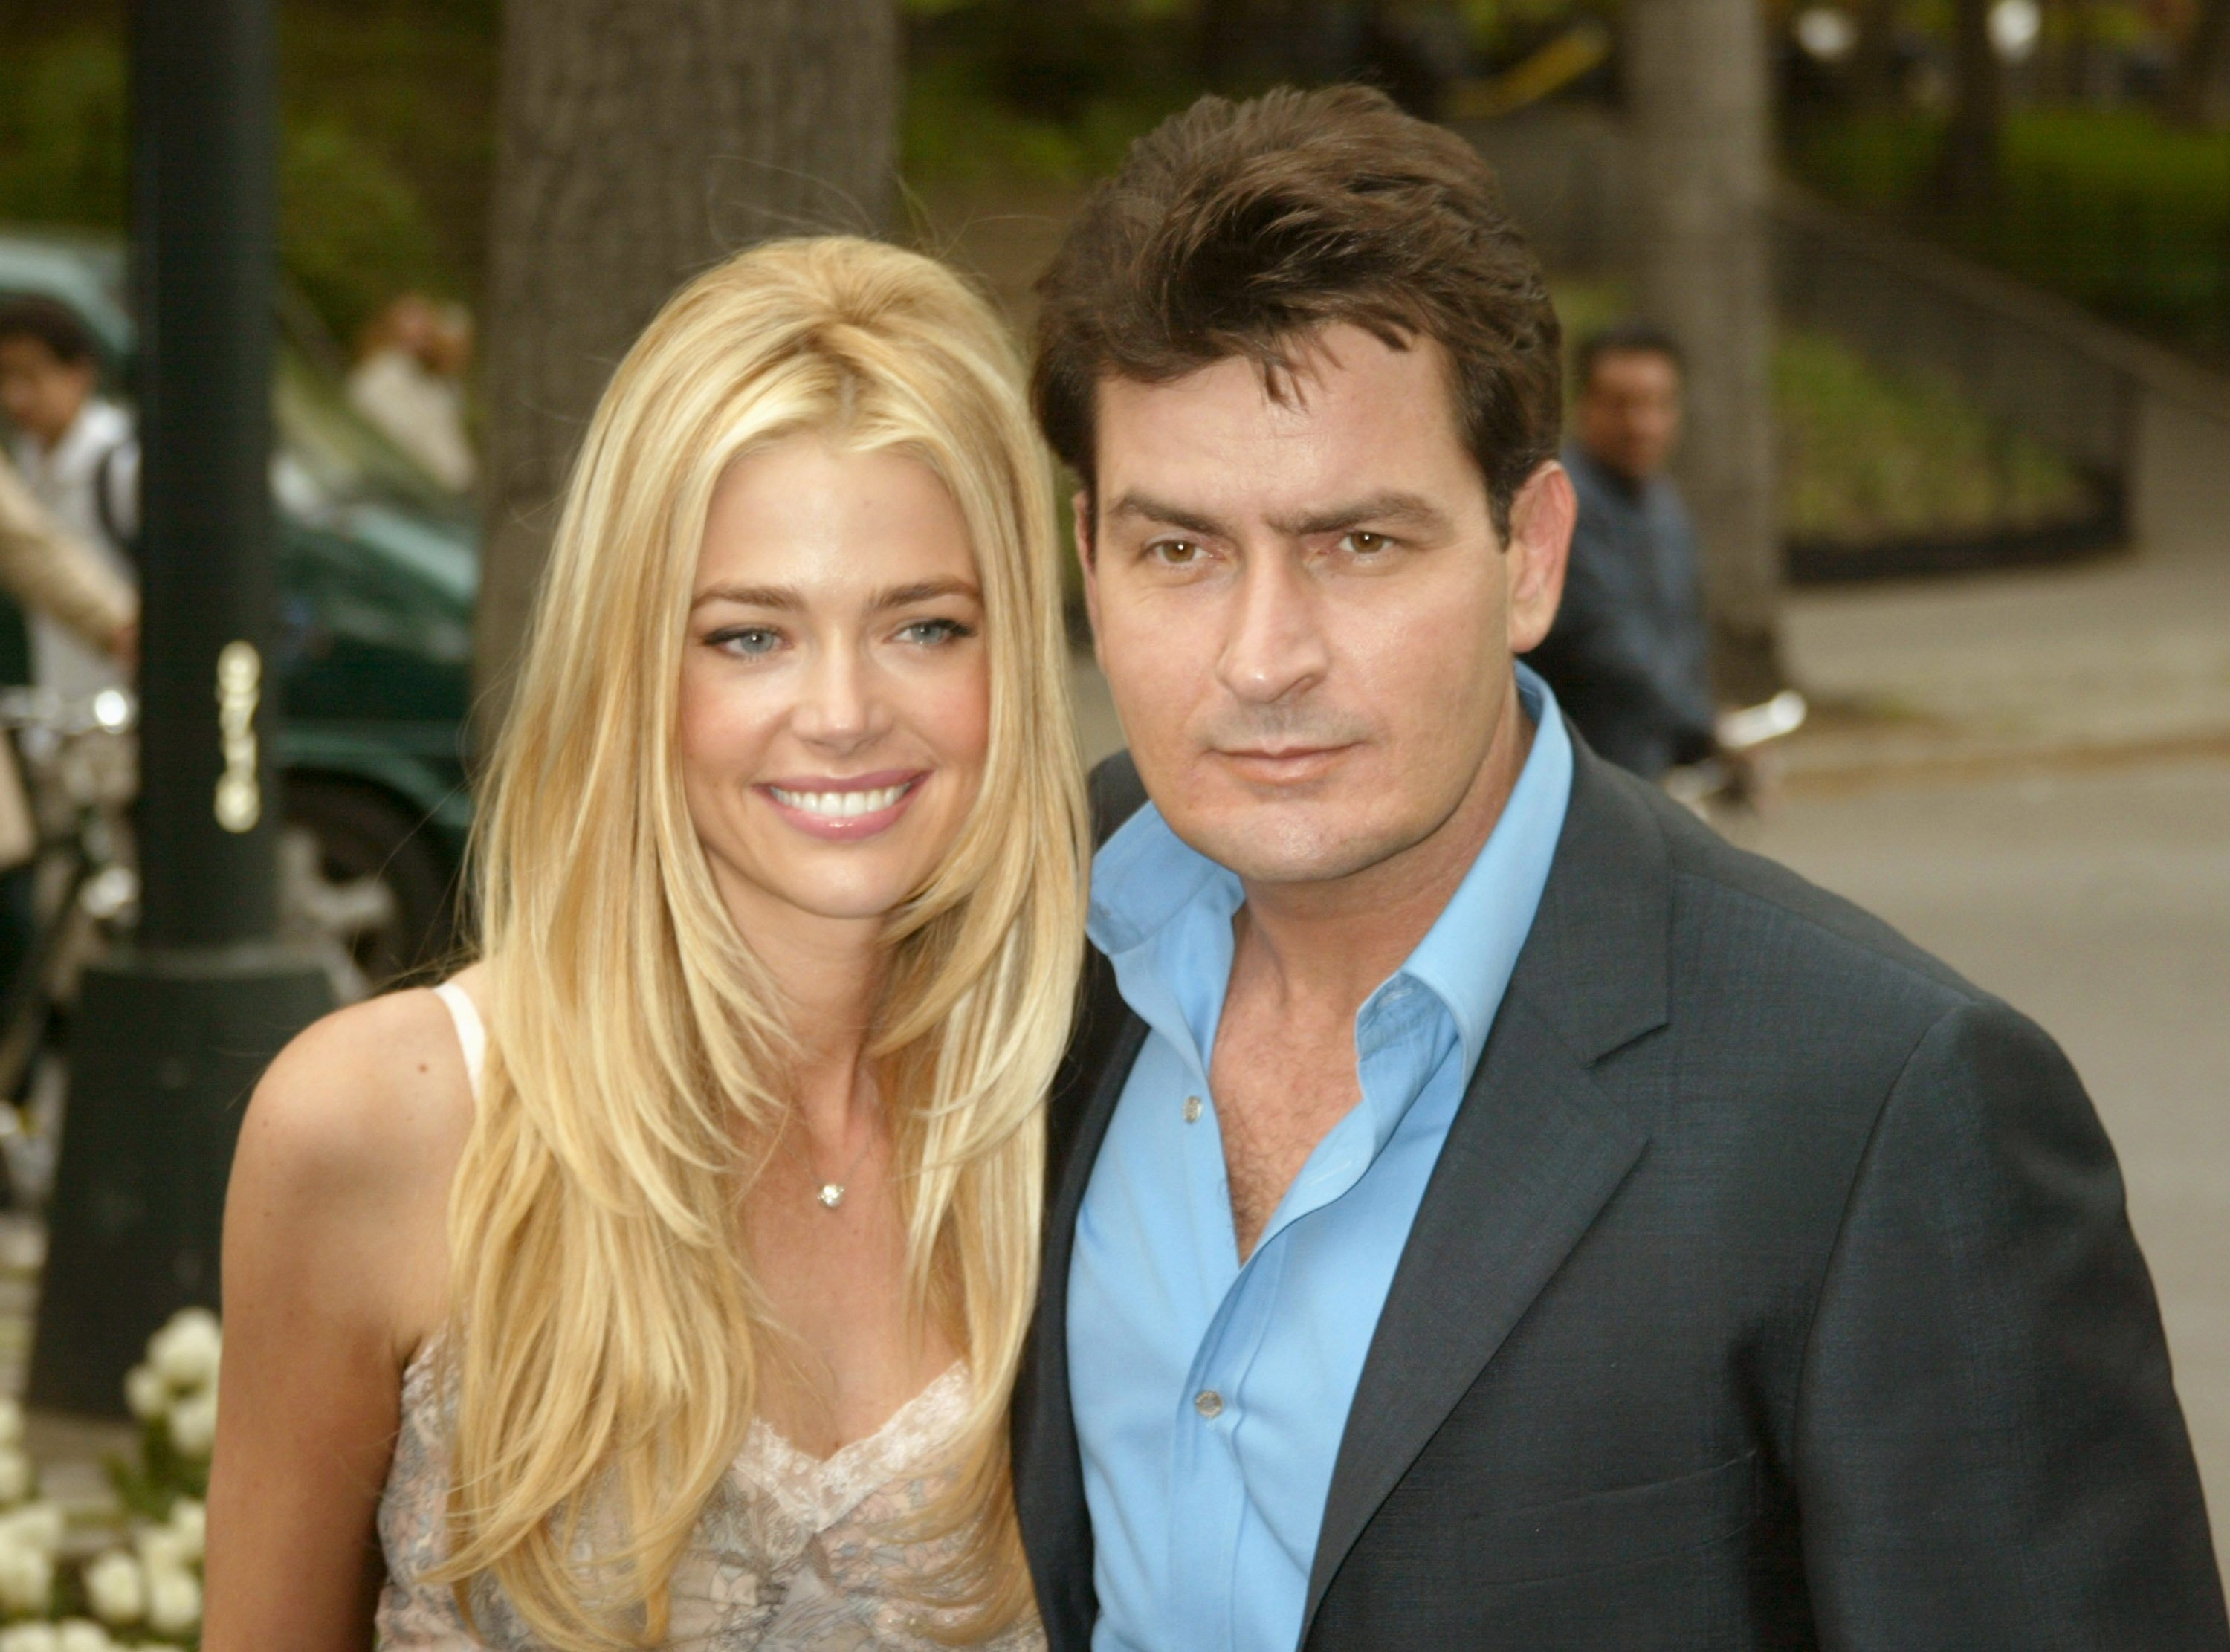 Denise Richards and Charlie Sheen at the Tavern on the Green in New York City, New York. | Photo: Getty Images